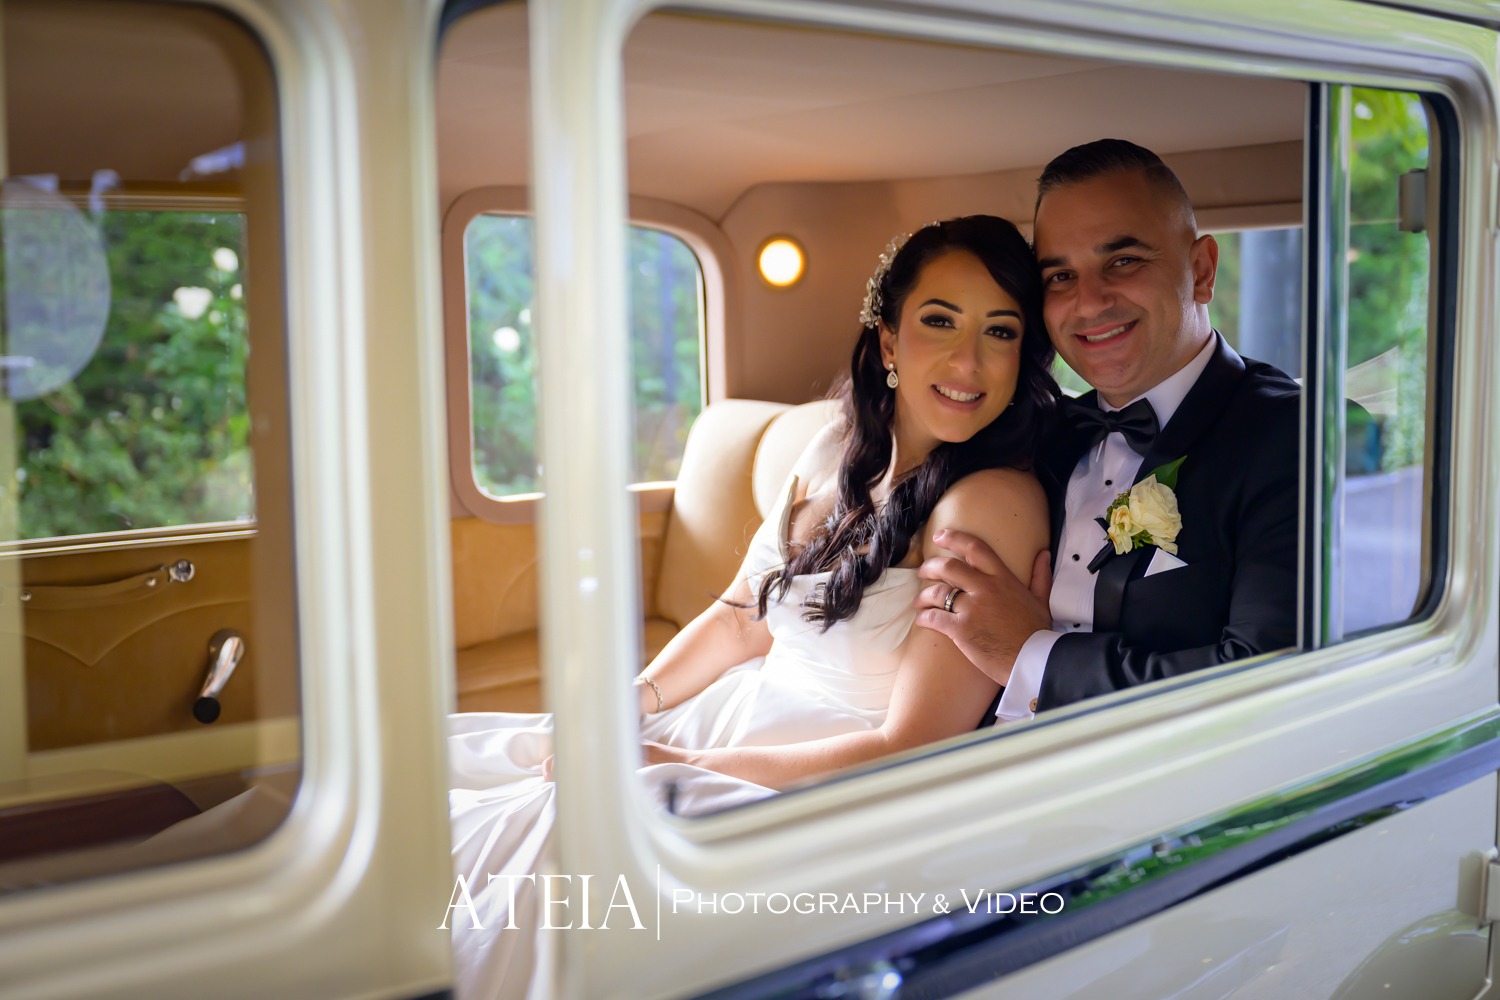 , Liana and Steven&#8217;s wedding photography at Vogue Ballroom captured by ATEIA Photography &#038; Video